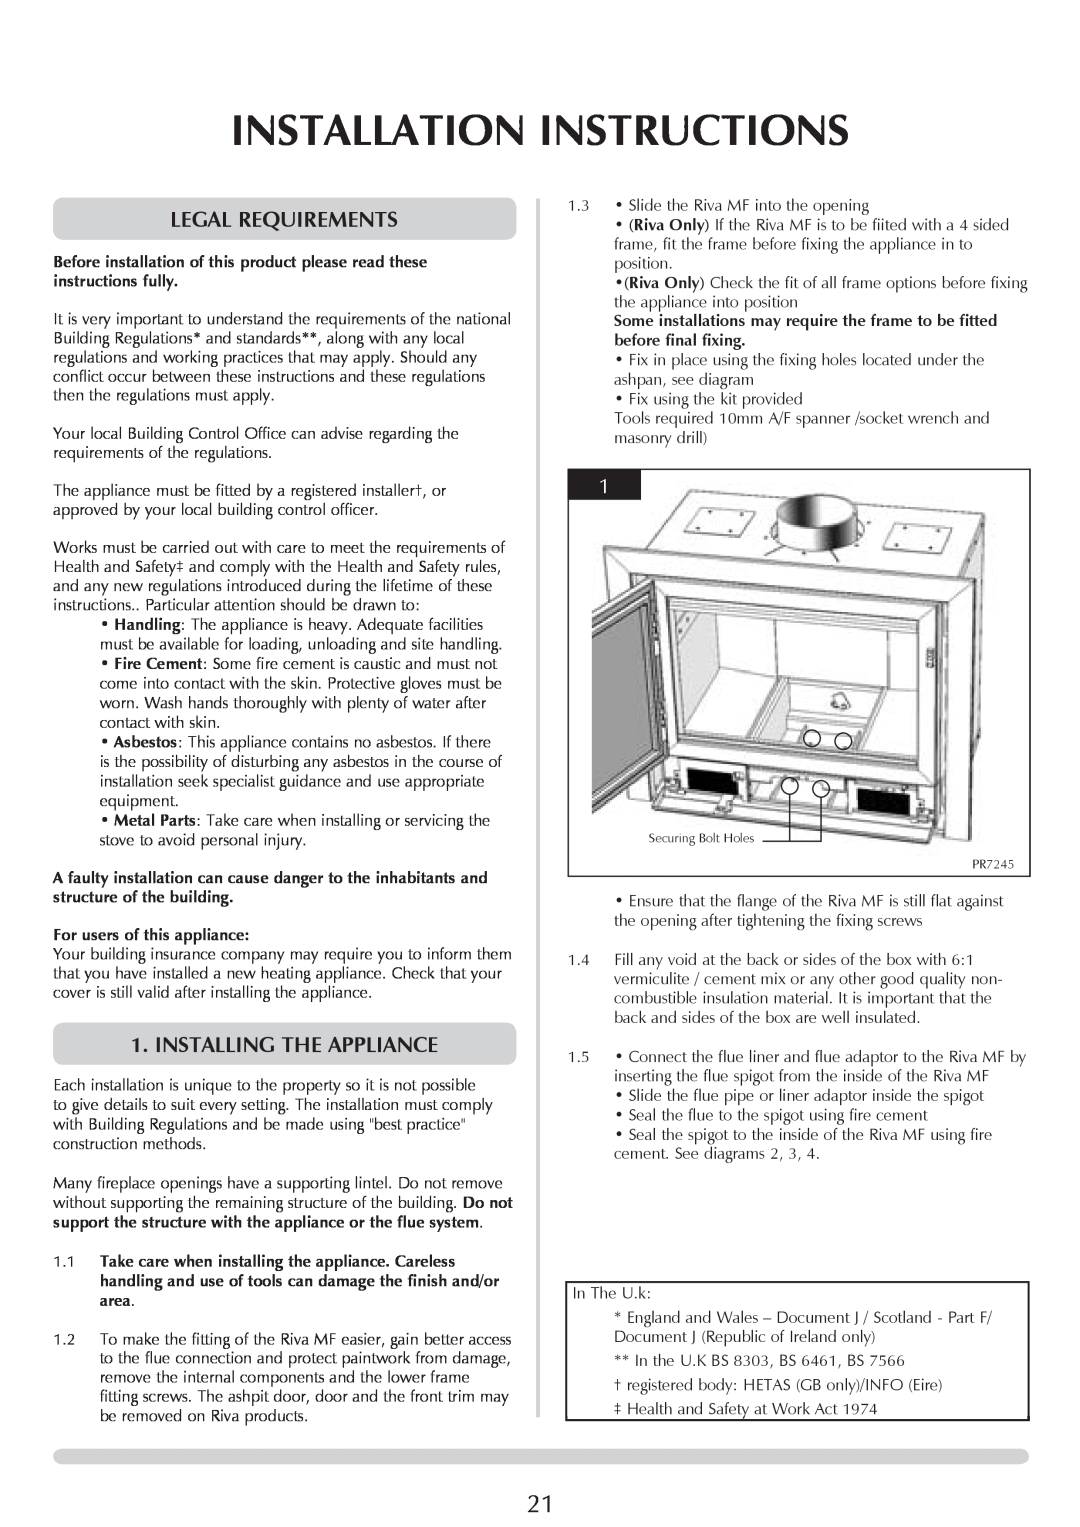 Stovax RV40, RV66 Installation Instructions, Legal requirements, INSTALLING THE Appliance, For users of this appliance 